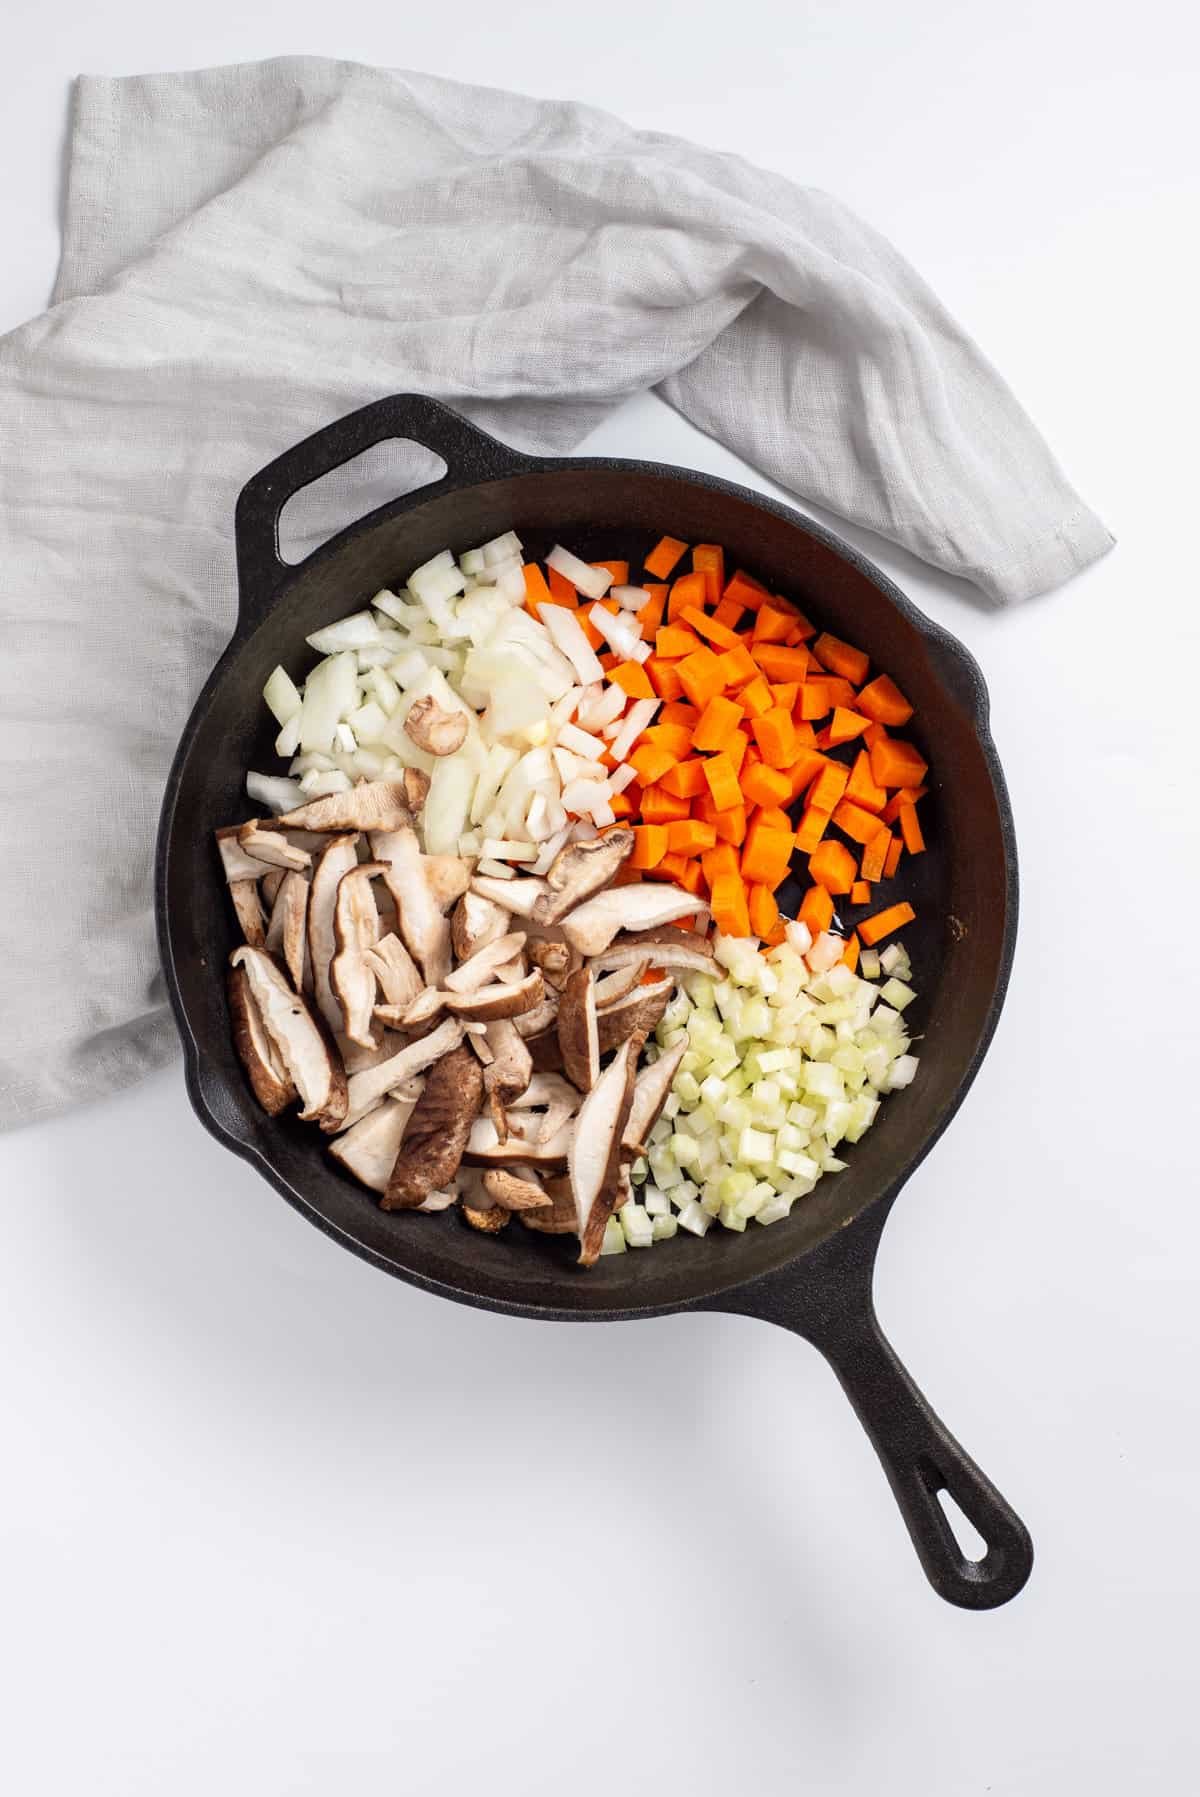 Overhead view showing skillet with onions, carrots, celery and shiitake mushrooms.